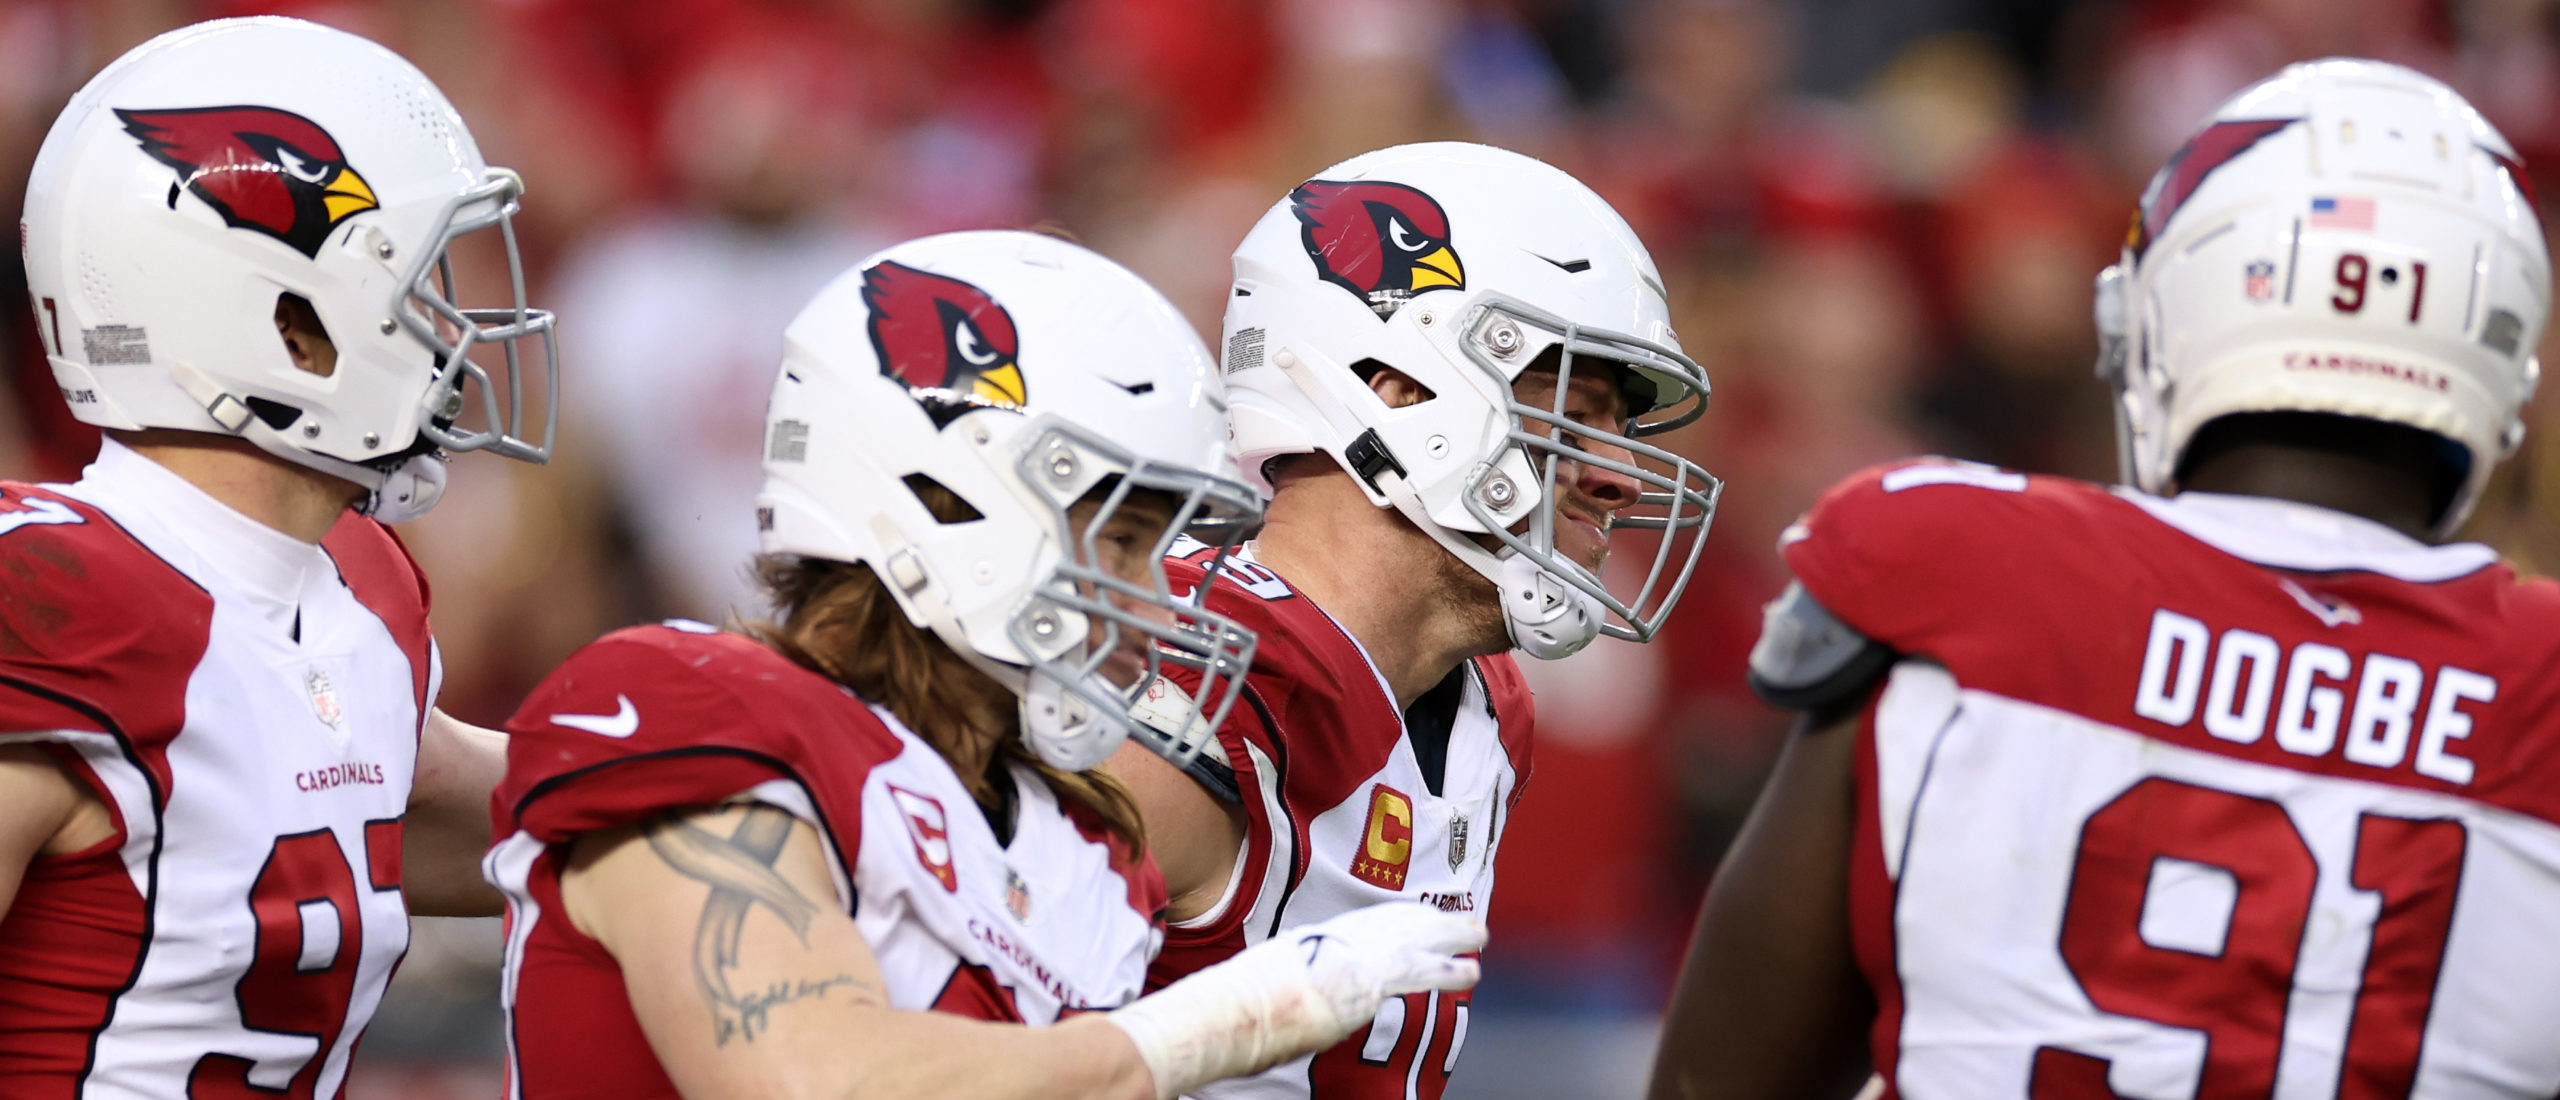 Cardinals unveil new uniforms for first time since 2005, Sports